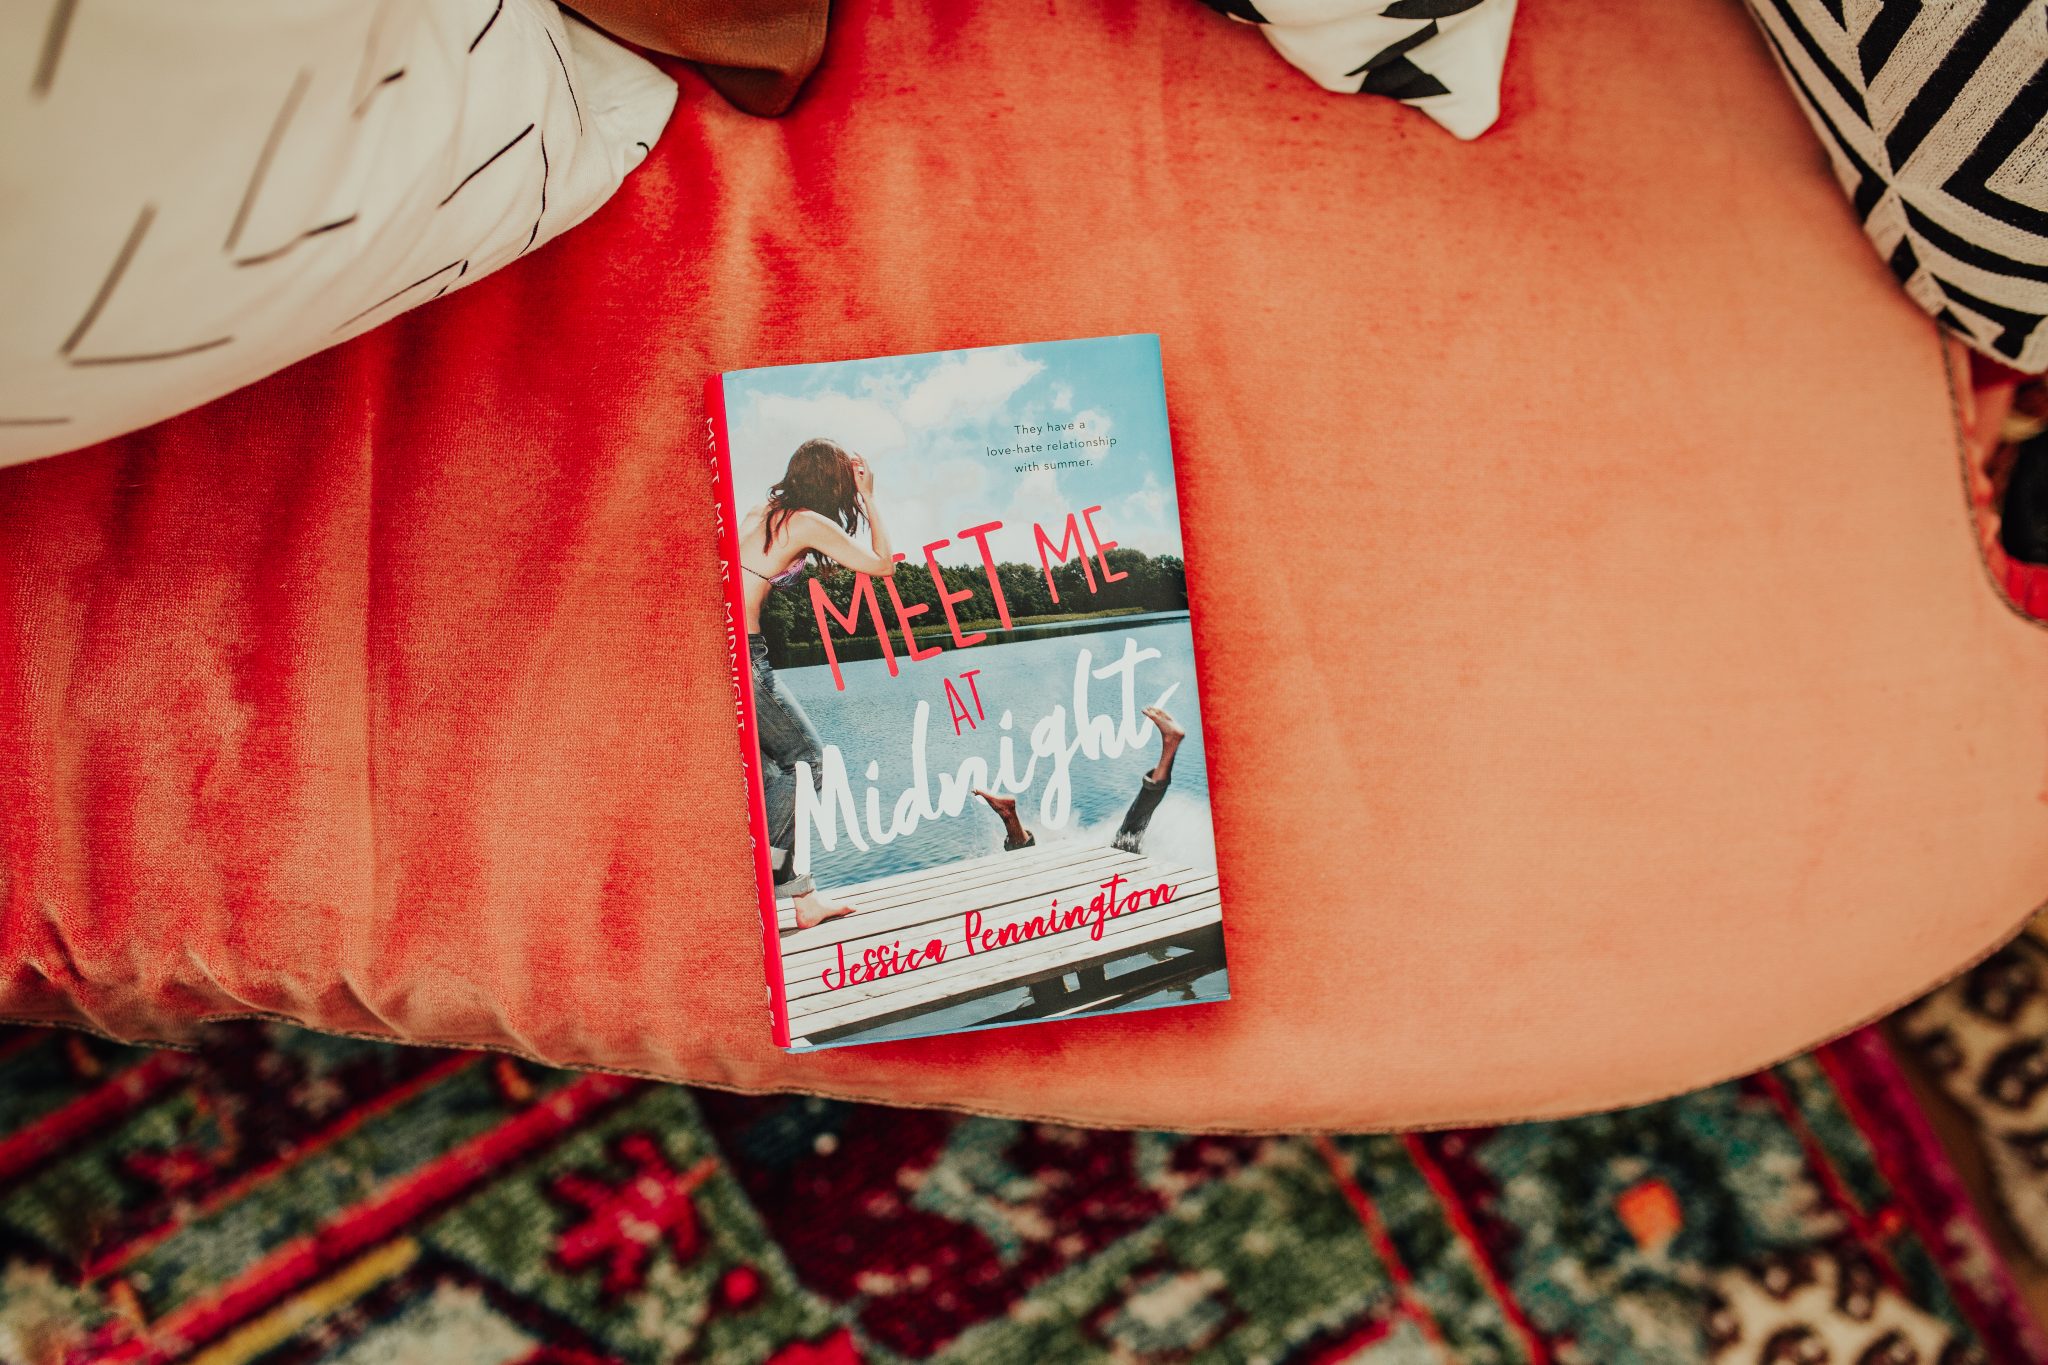 Book Review: Meet Me at Midnight by Jessica Pennington » at Home on Hudson